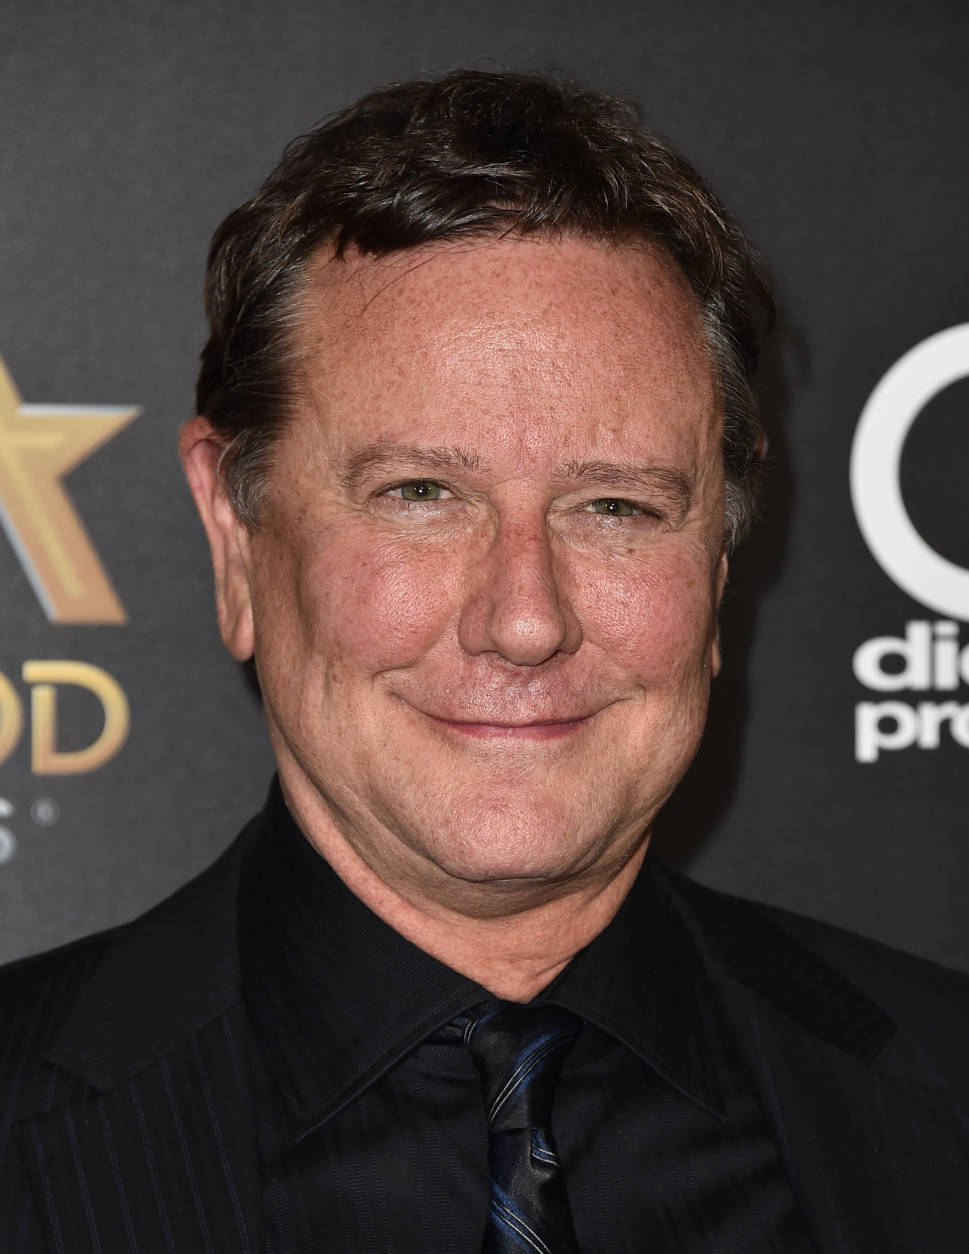 Judge Reinhold arrives at the Hollywood Film Awards at the Beverly Hilton Hotel on Sunday, Nov. 1, 2015, in Beverly Hills, Calif. (Photo by Jordan Strauss/Invision/AP)